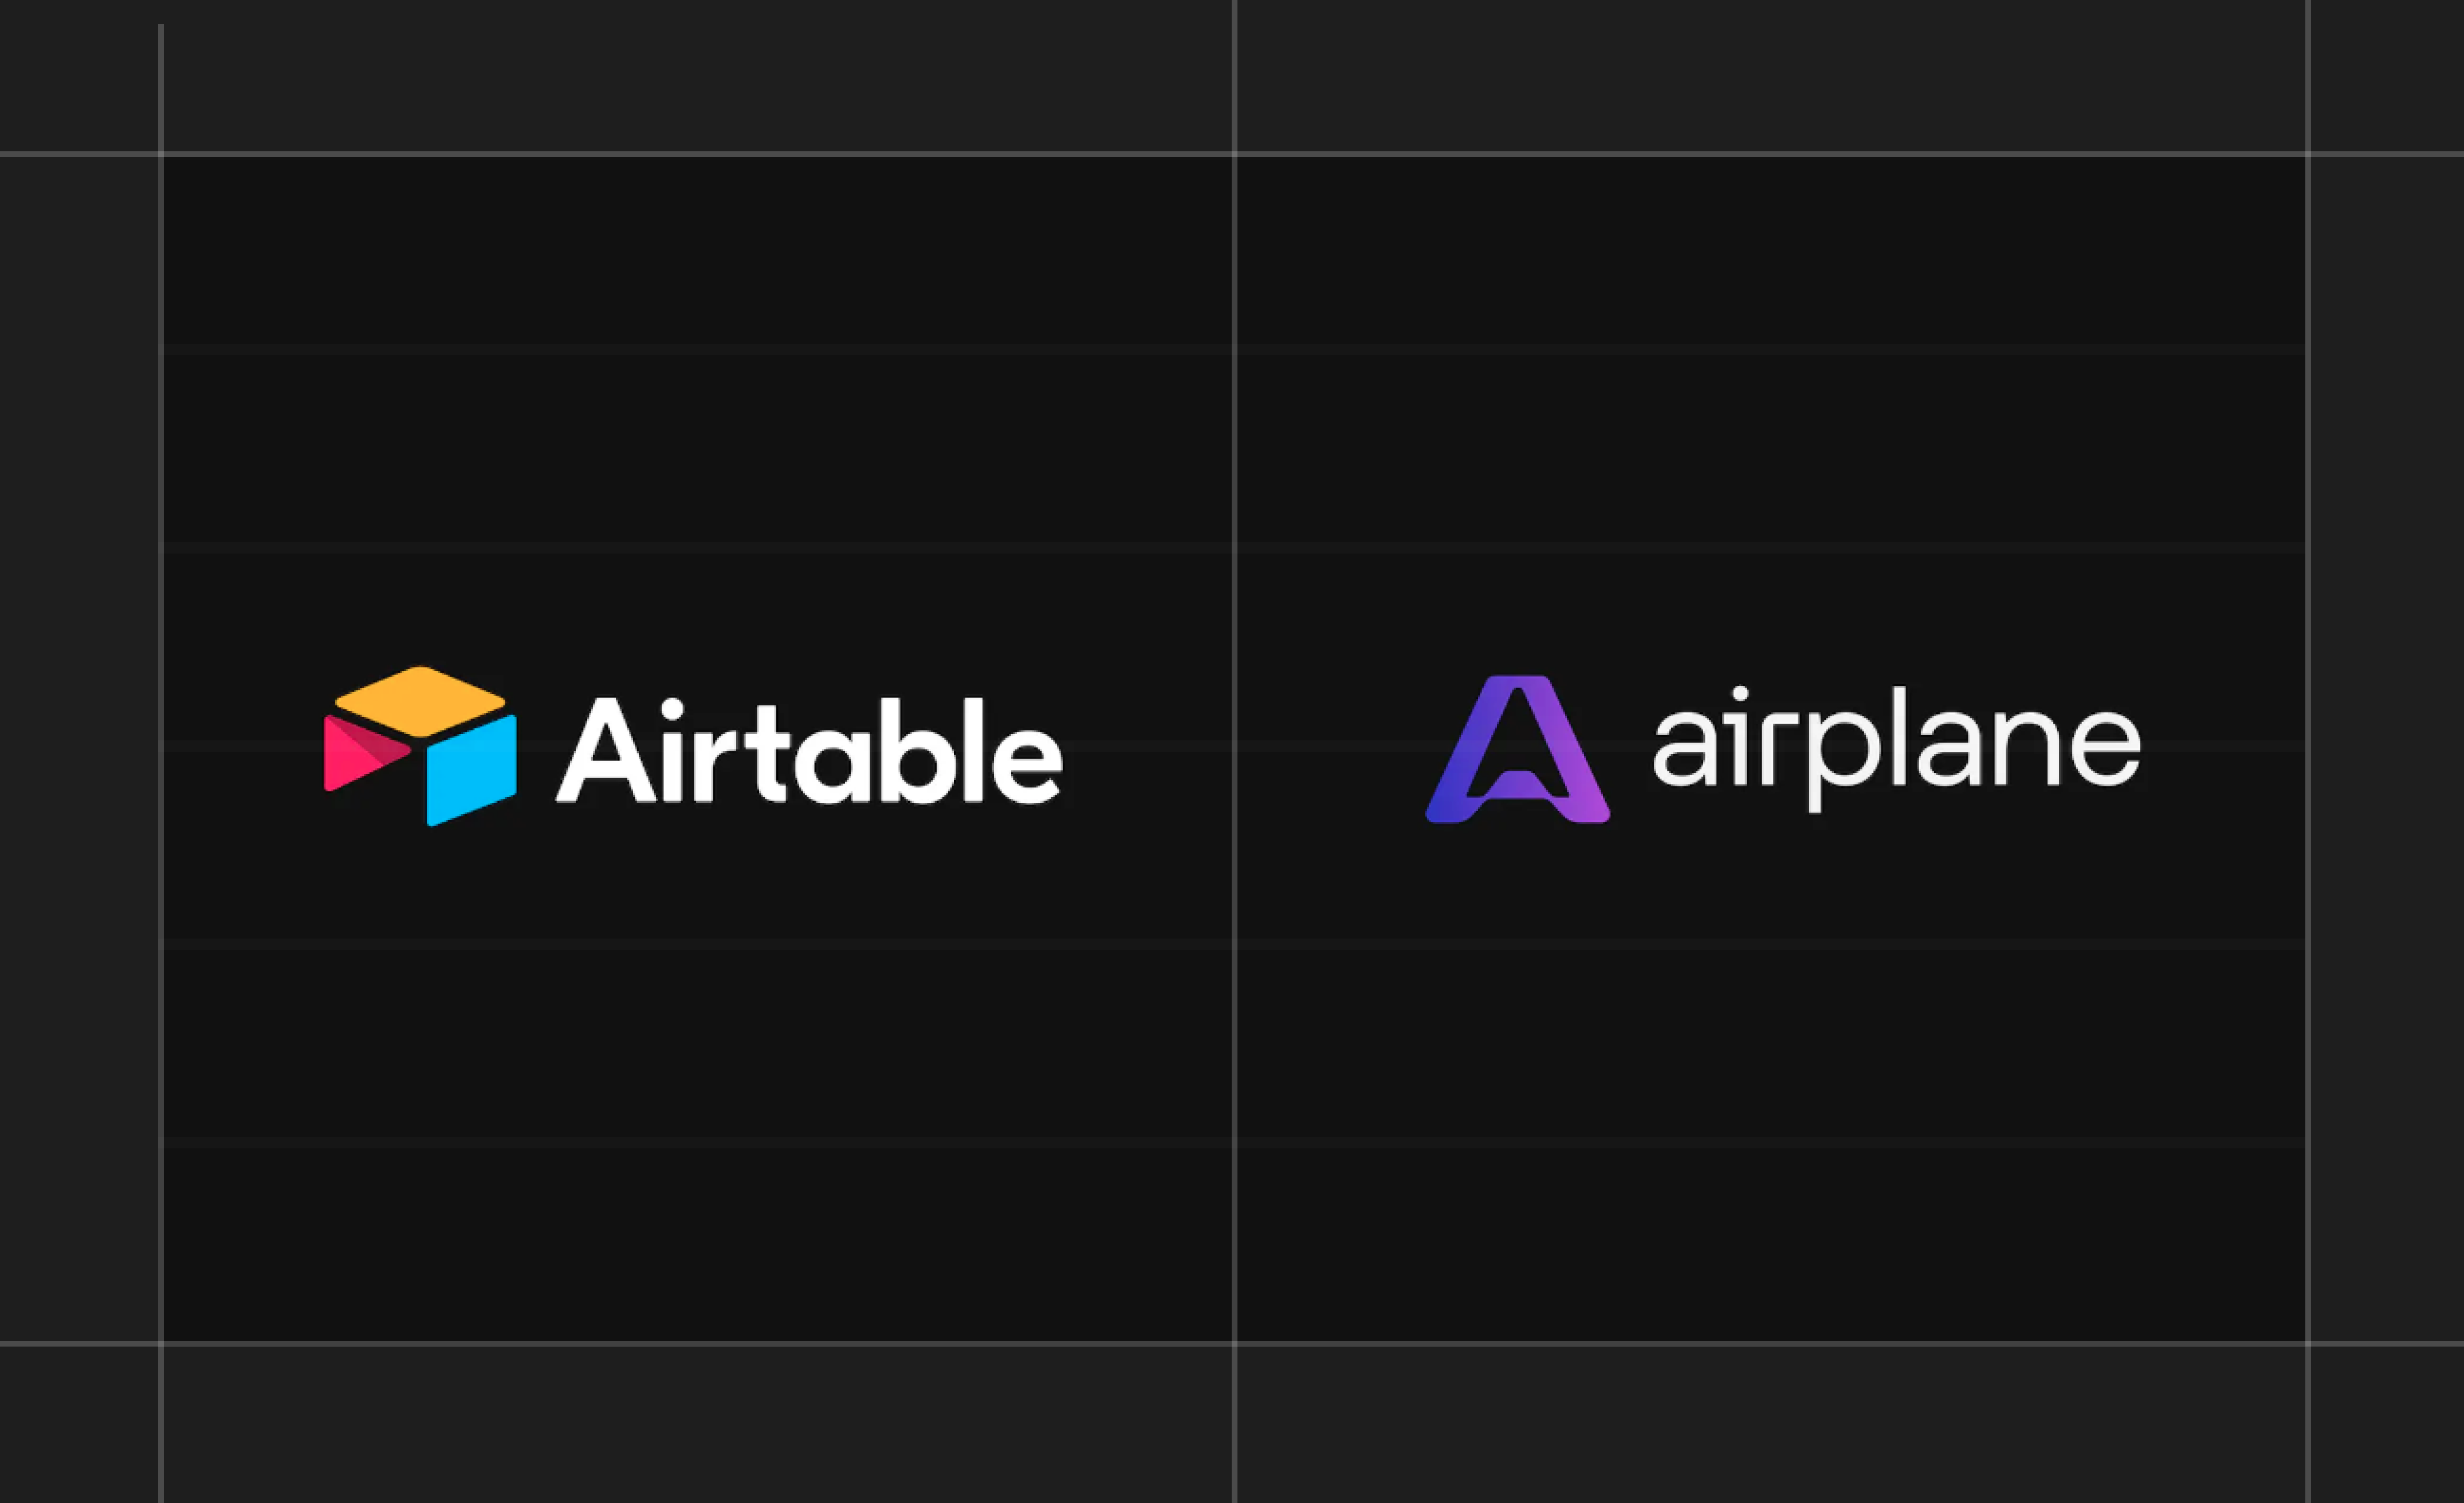 Airplane.dev acquired by Airtable